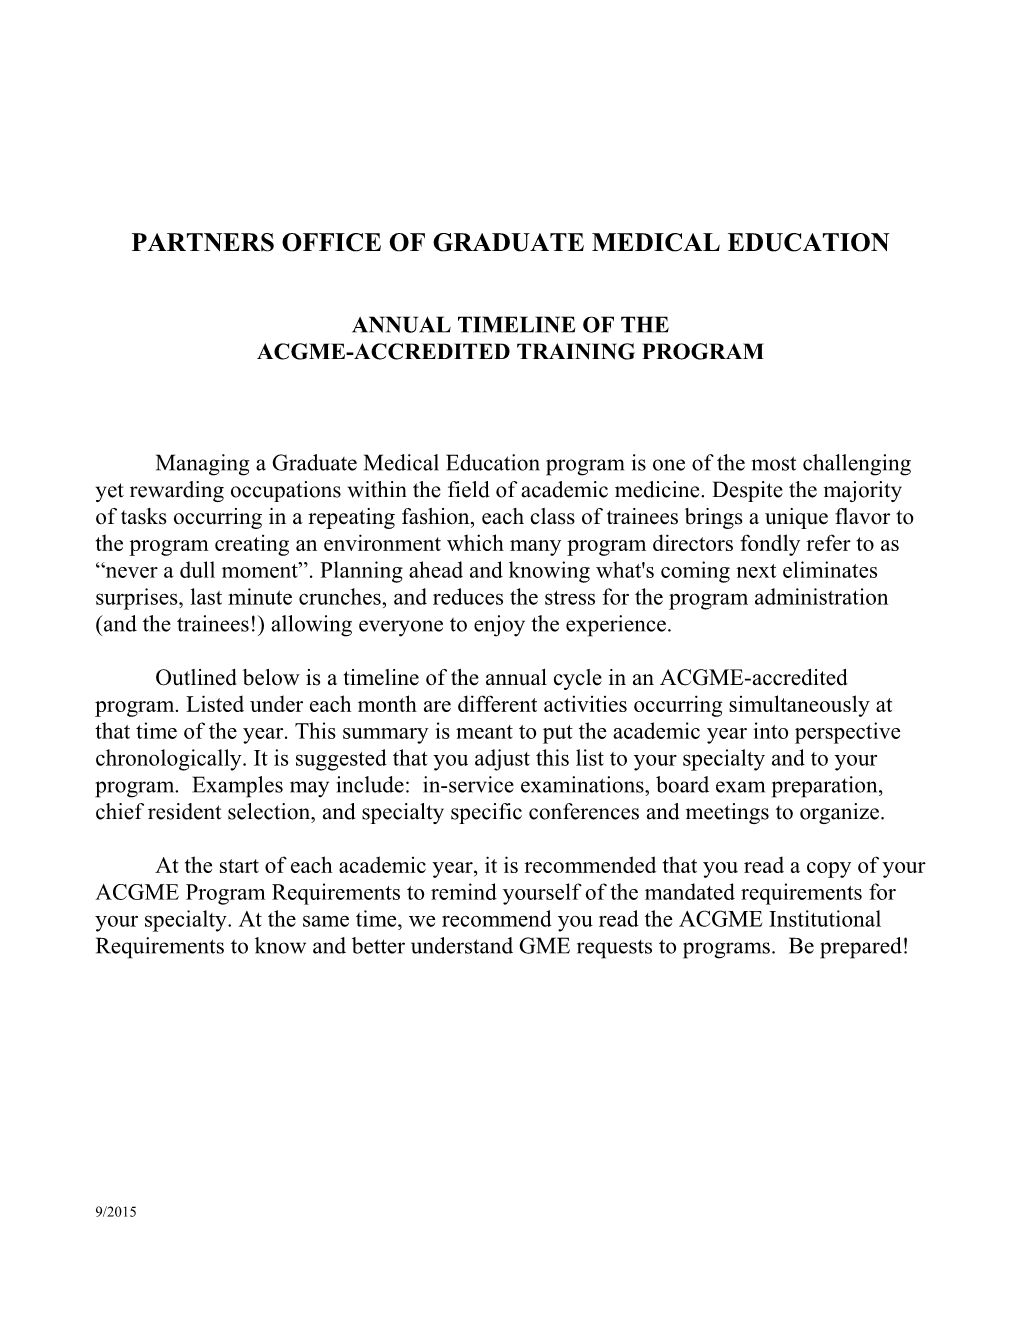 Partners Office of Graduate Medical Education